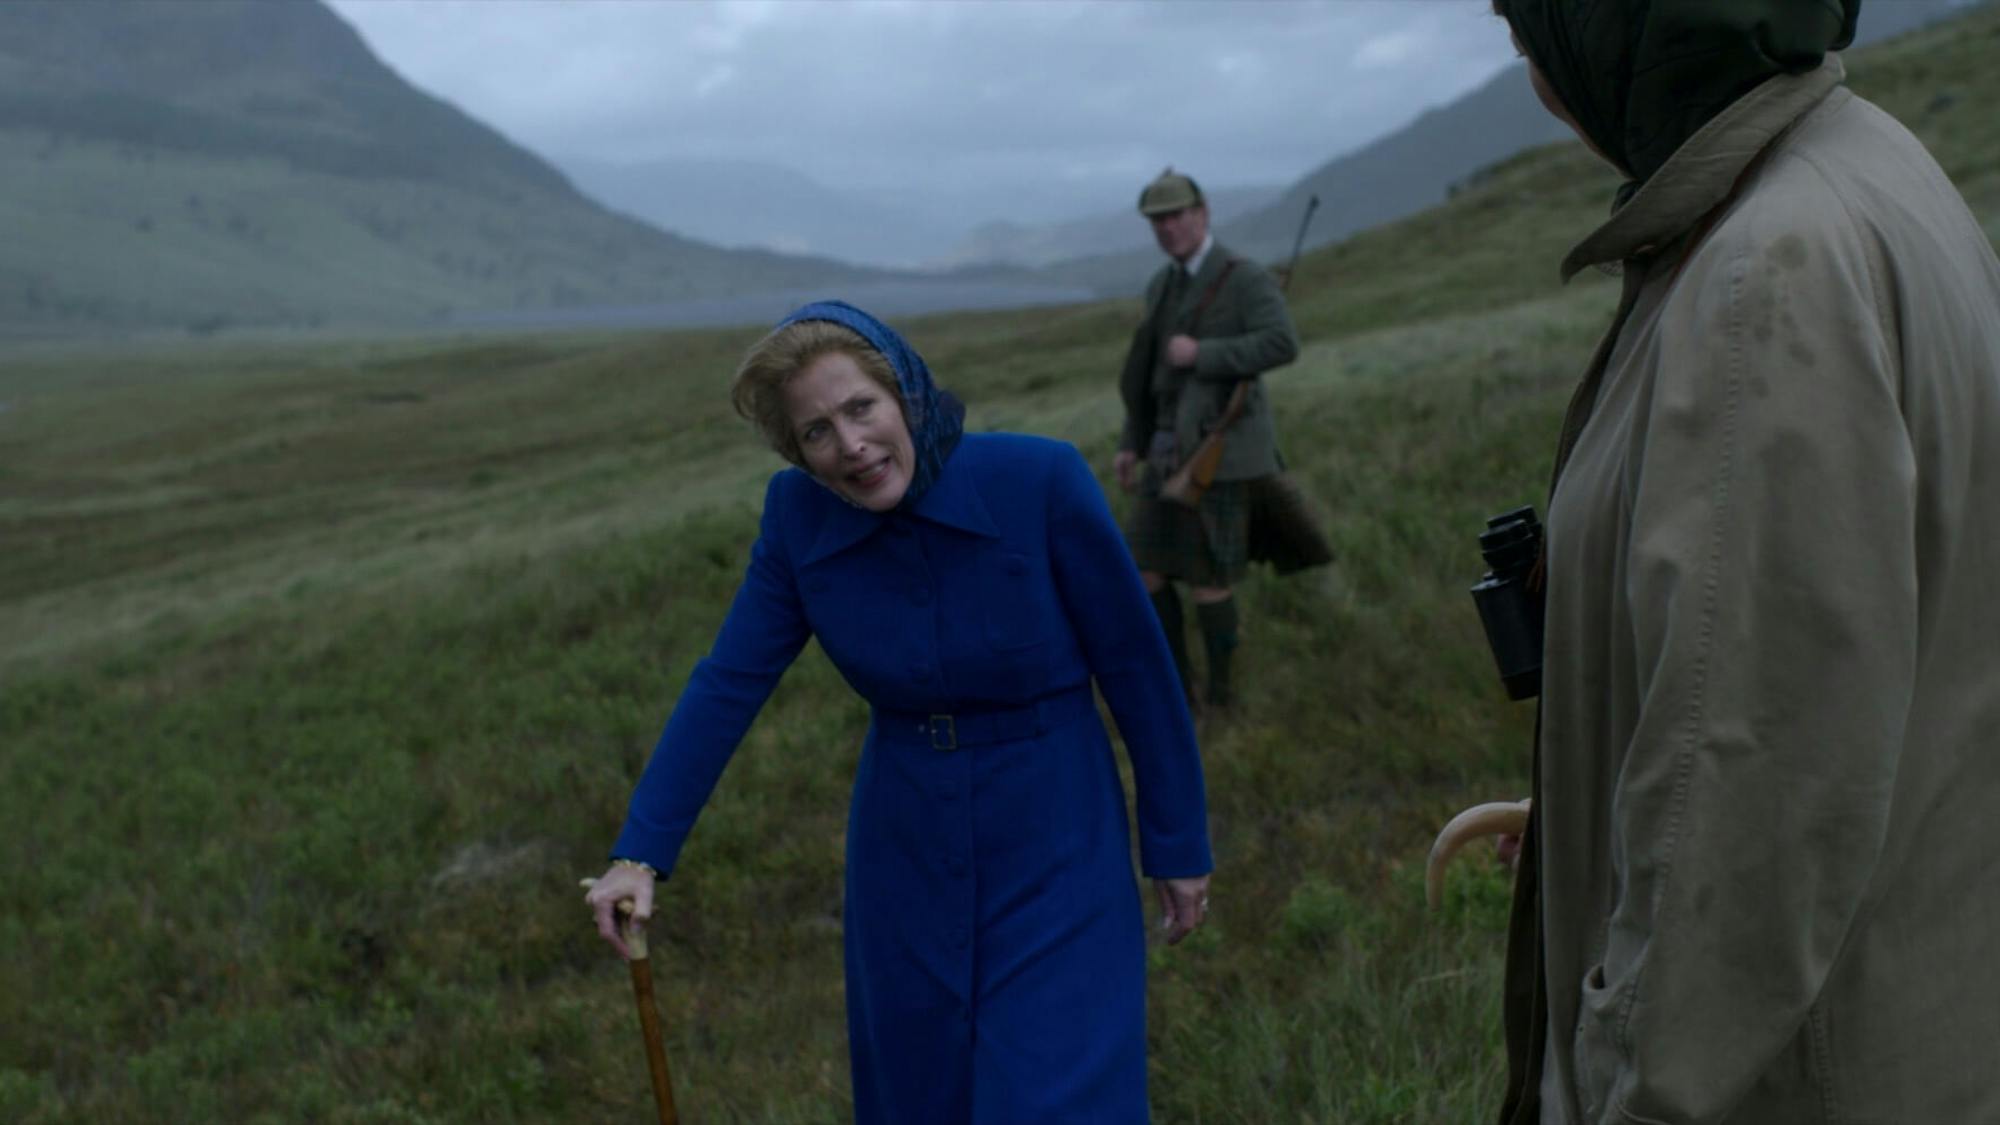 Margaret Thatcher wears a striking blue outfit that stands out amidst the greens and greys of Balmoral. Her dissonant outfit matches her uncomfortable expression.